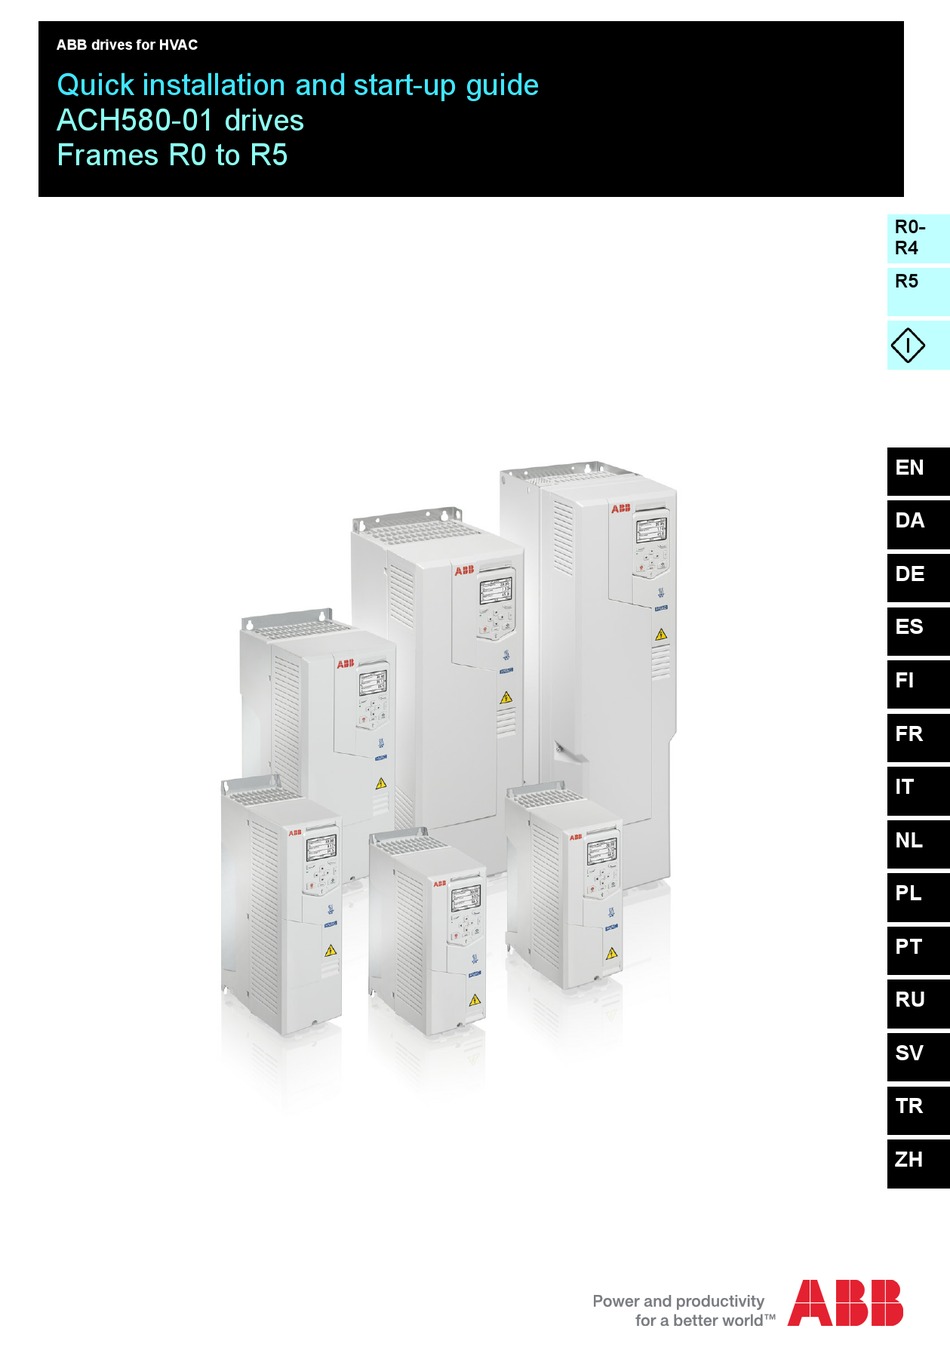 ABB ACH580-01 QUICK INSTALLATION AND START-UP MANUAL Pdf Download